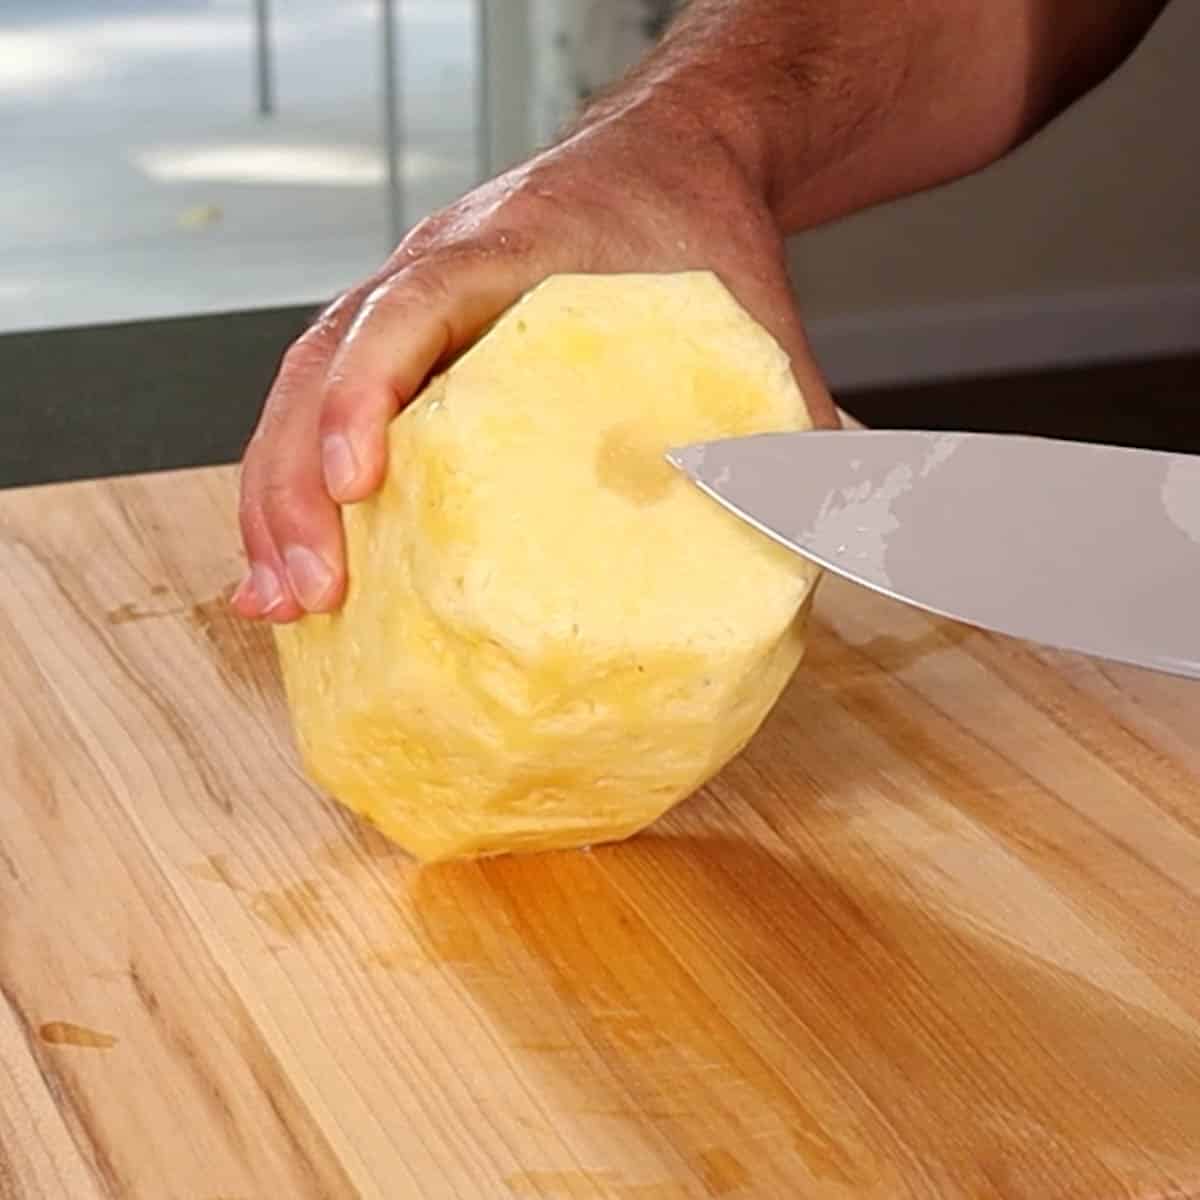 A peeled pineapple with a chef knife pointing to the core.